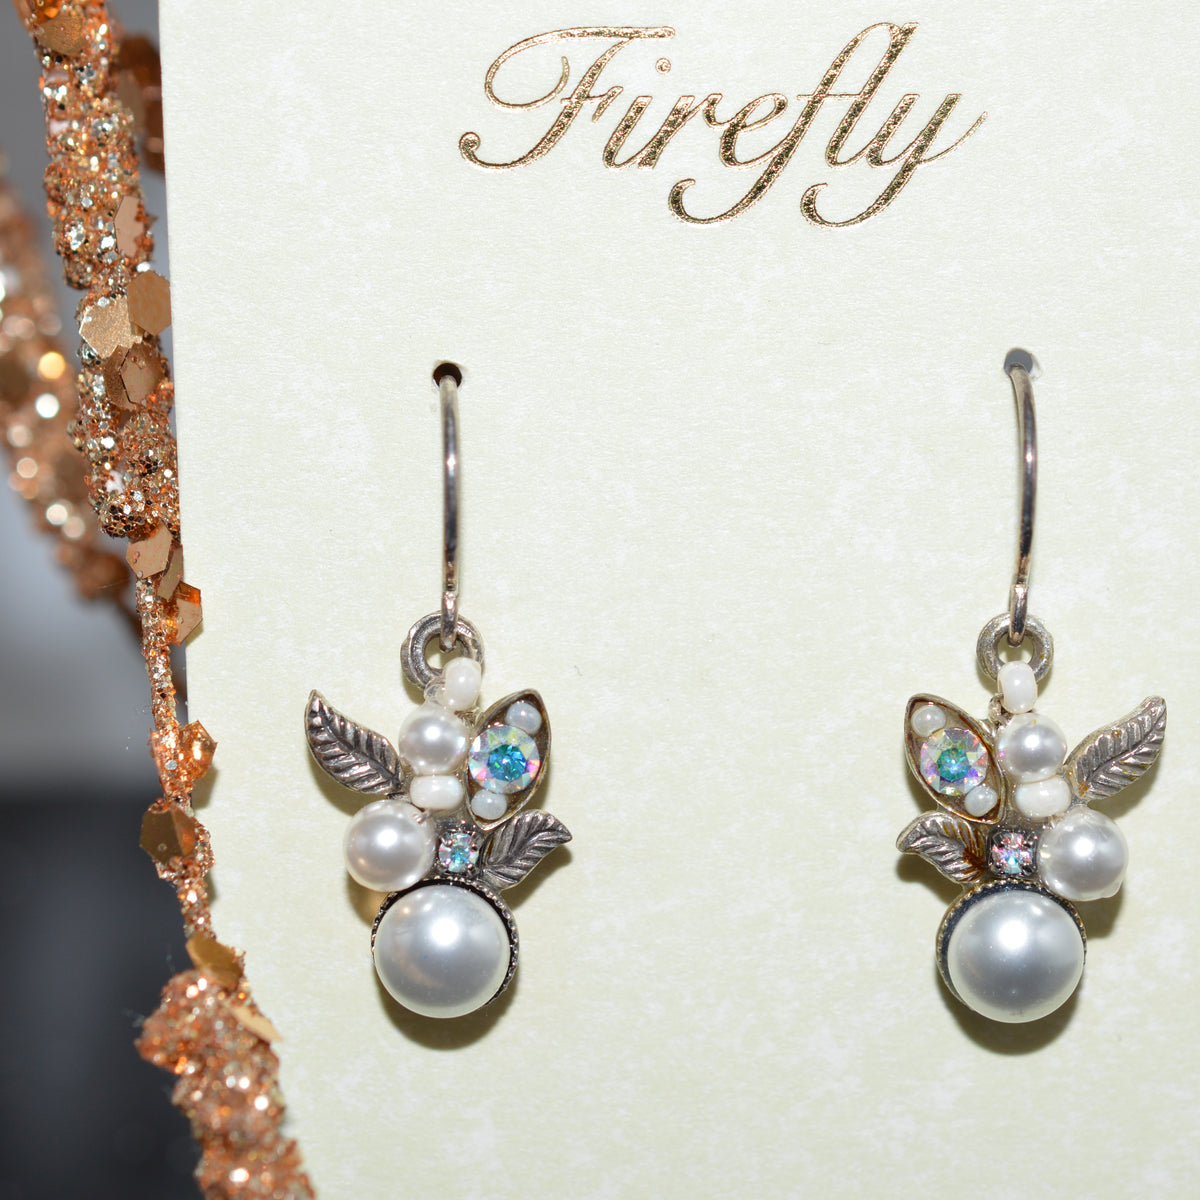 Antique Silver Plated Pearl And White Crystals Earrings by Firefly